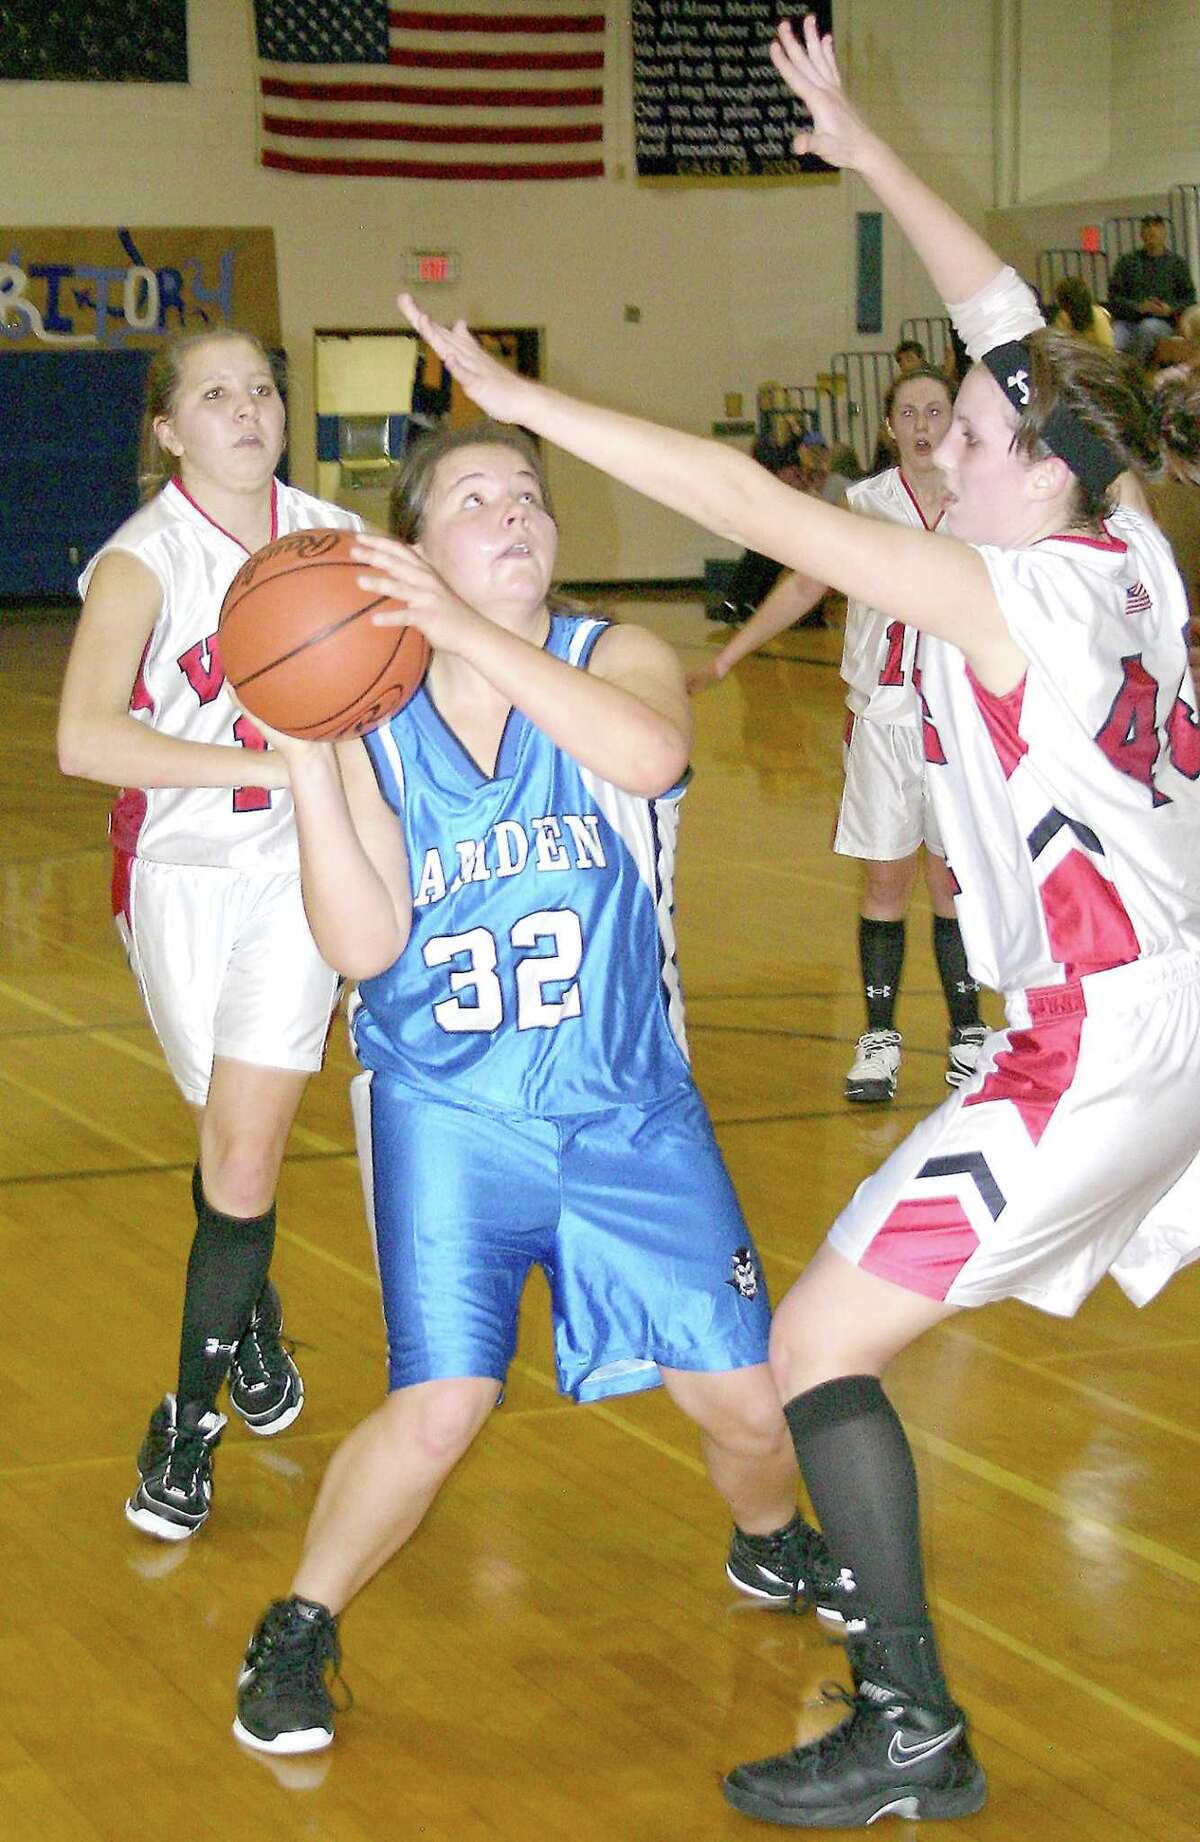 Submitted Photo by JON RATHBUN Camden's Michelle Wishart (32) looks to shoot over VVS' Leanne Doolen, right, in the opening game of the Dolgeville Tournament Saturday, November 26, 2011. Red Devils point guard Marissa Randall backs up the play. The Blue Devils won 53-48.